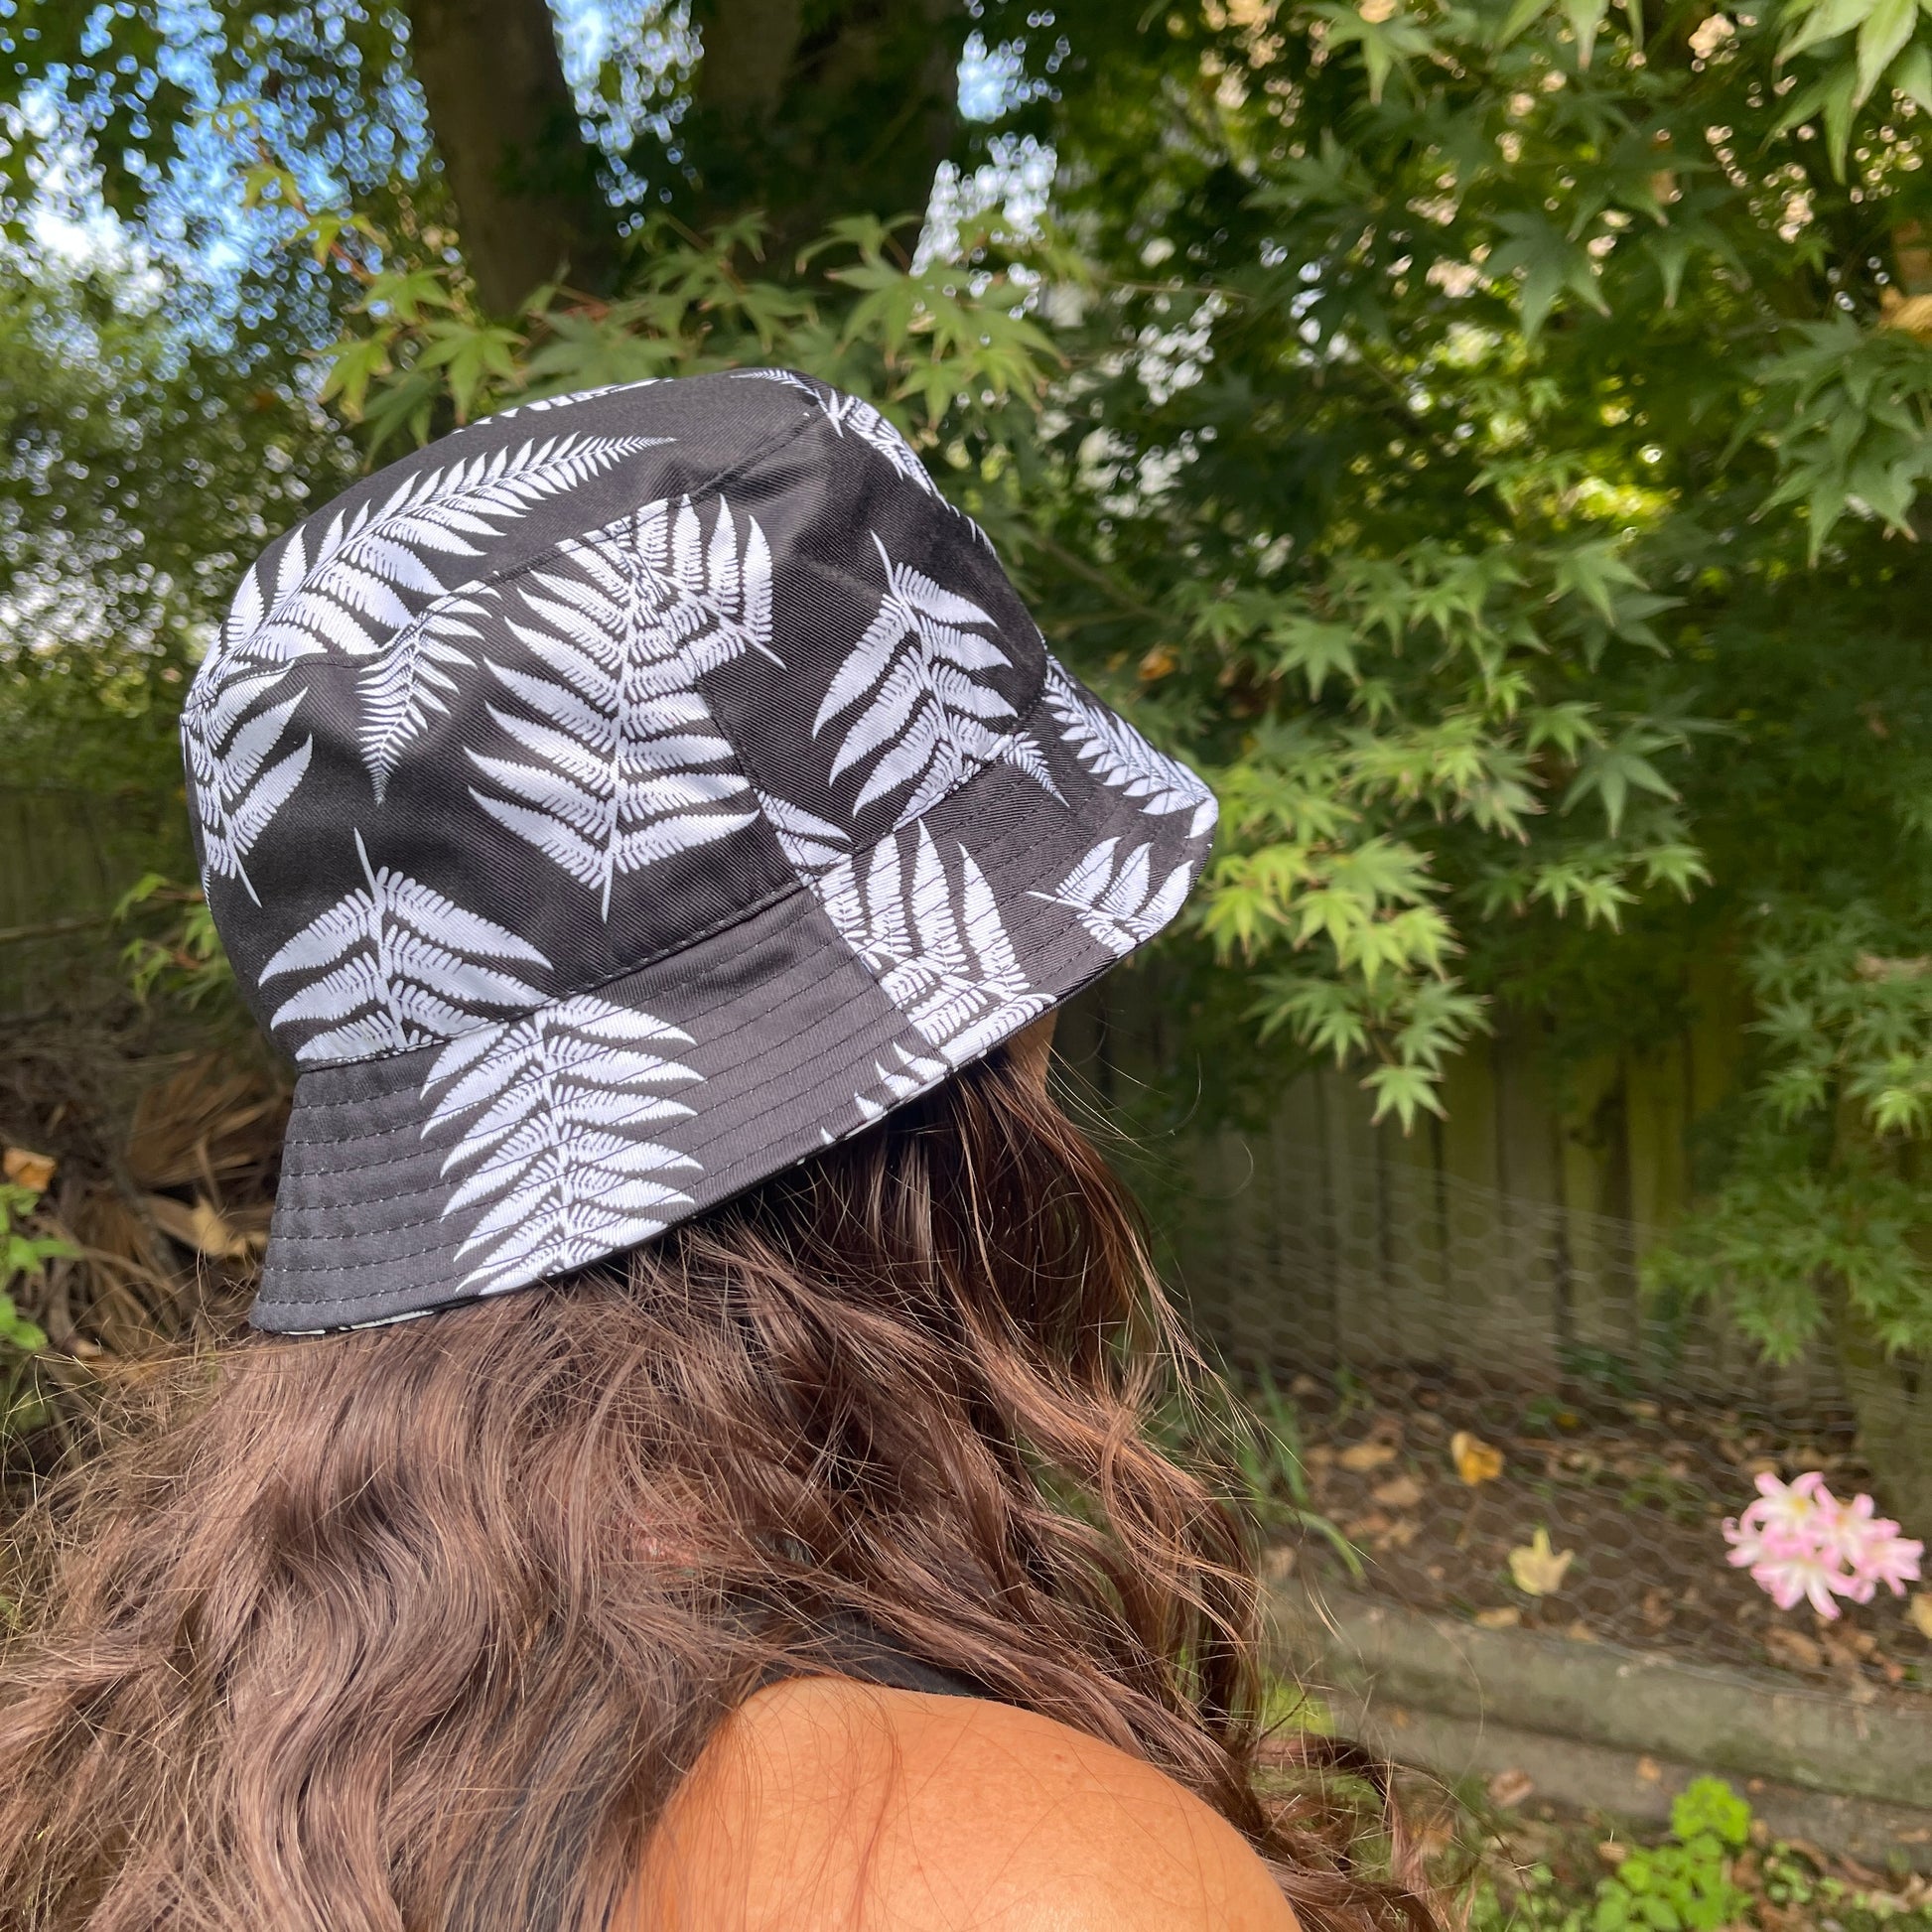 Side profile of a woman with long brown hair head wearing a bucket hat in black with white ferns printed on it.